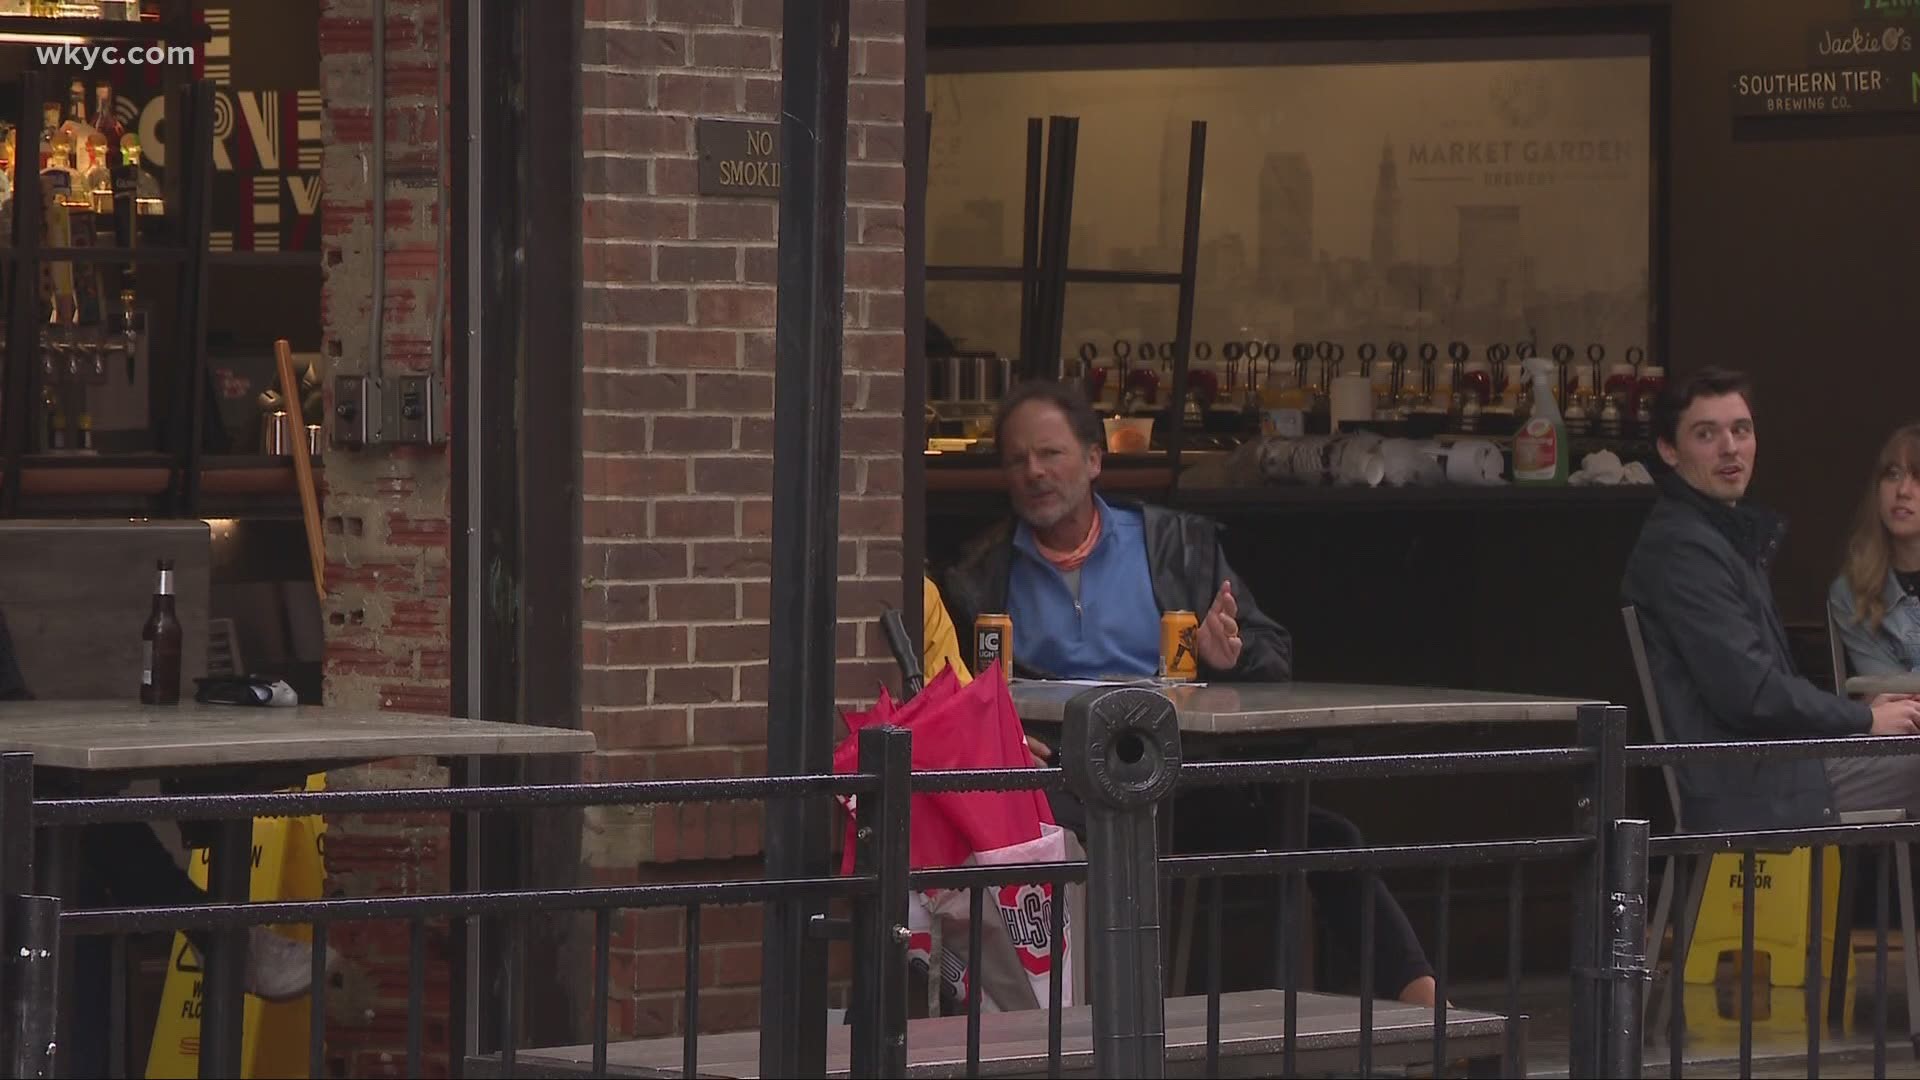 It was the big day that bars and restaurants in Ohio could finally reopen their outdoor seating. But then the rain came down, and for some places, it was a wash.